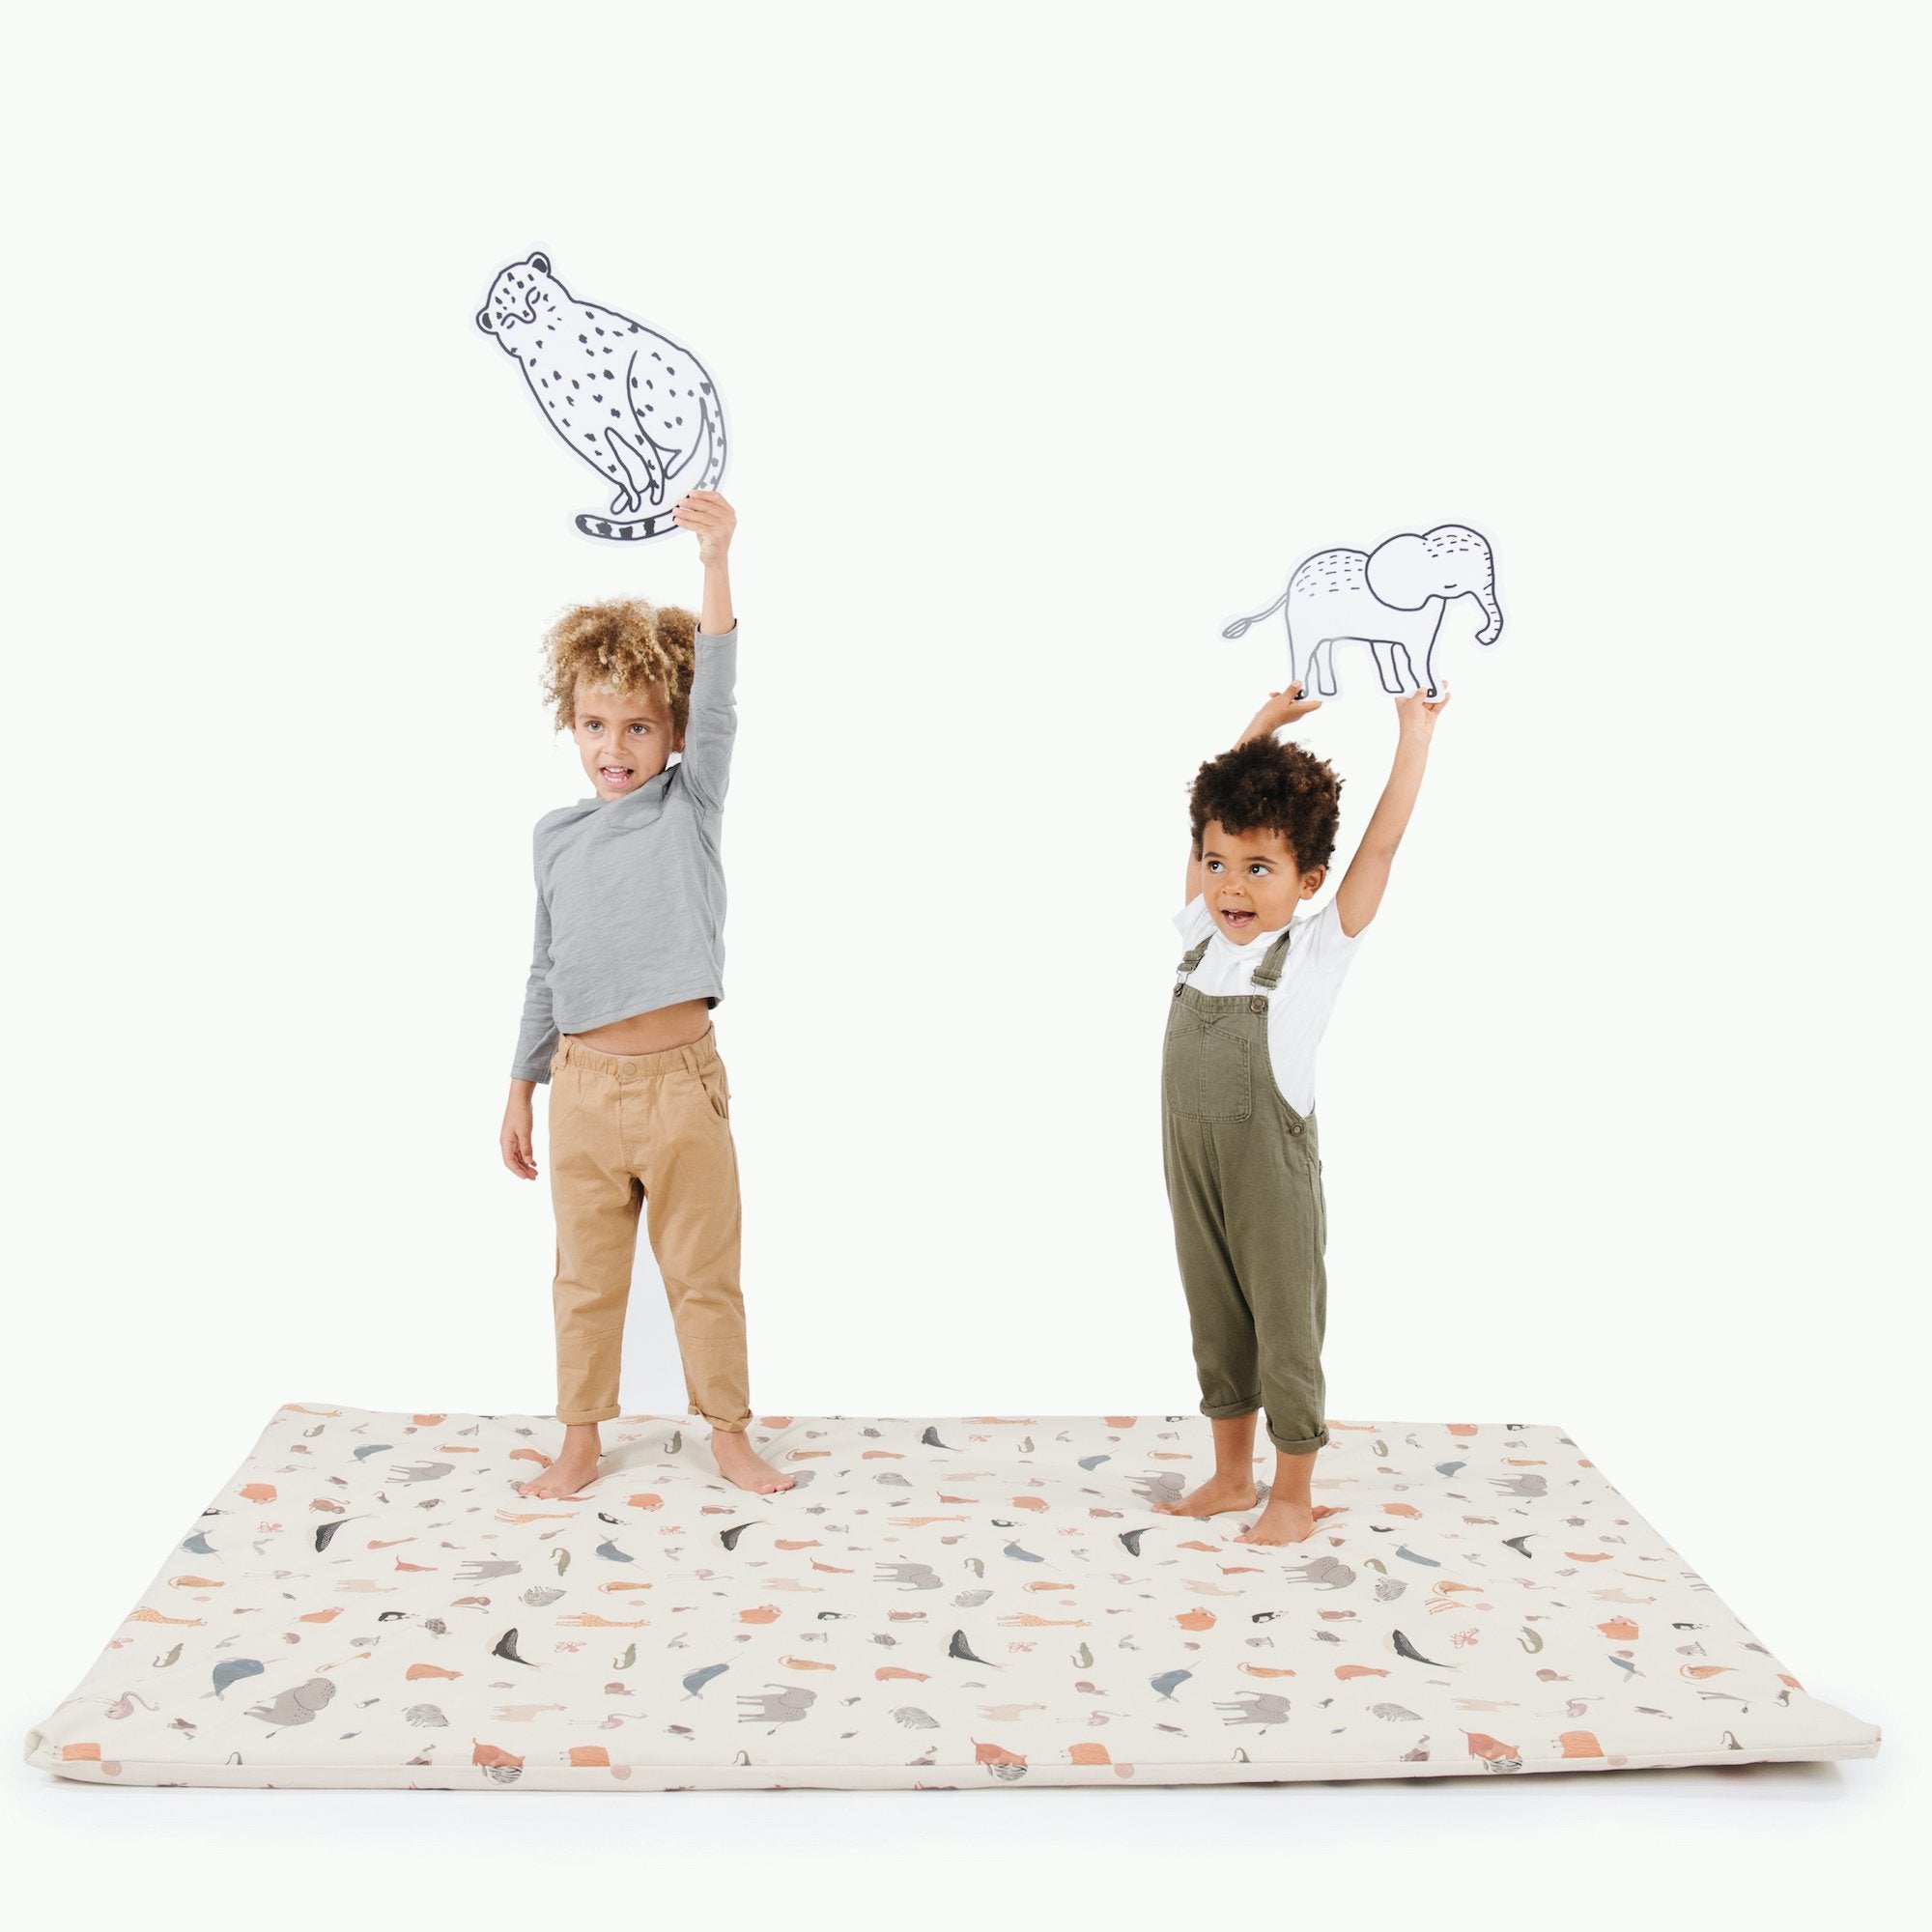 Menagerie@Kids standing on Menagerie Padded Midi+